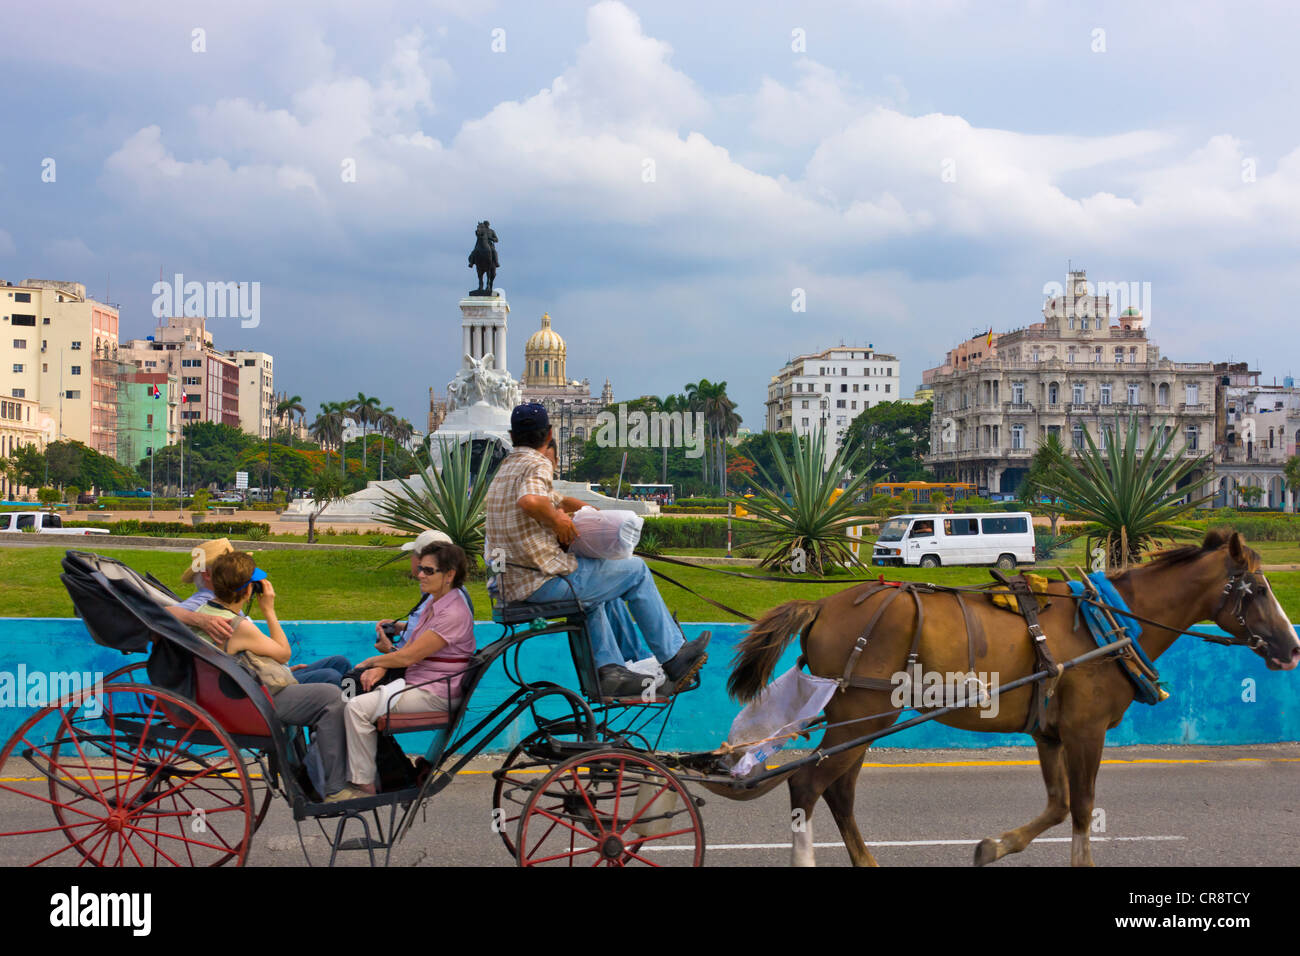 Horse carriage on the street in the historic center, Havana, UNESCO World Heritage site, Cuba Stock Photo